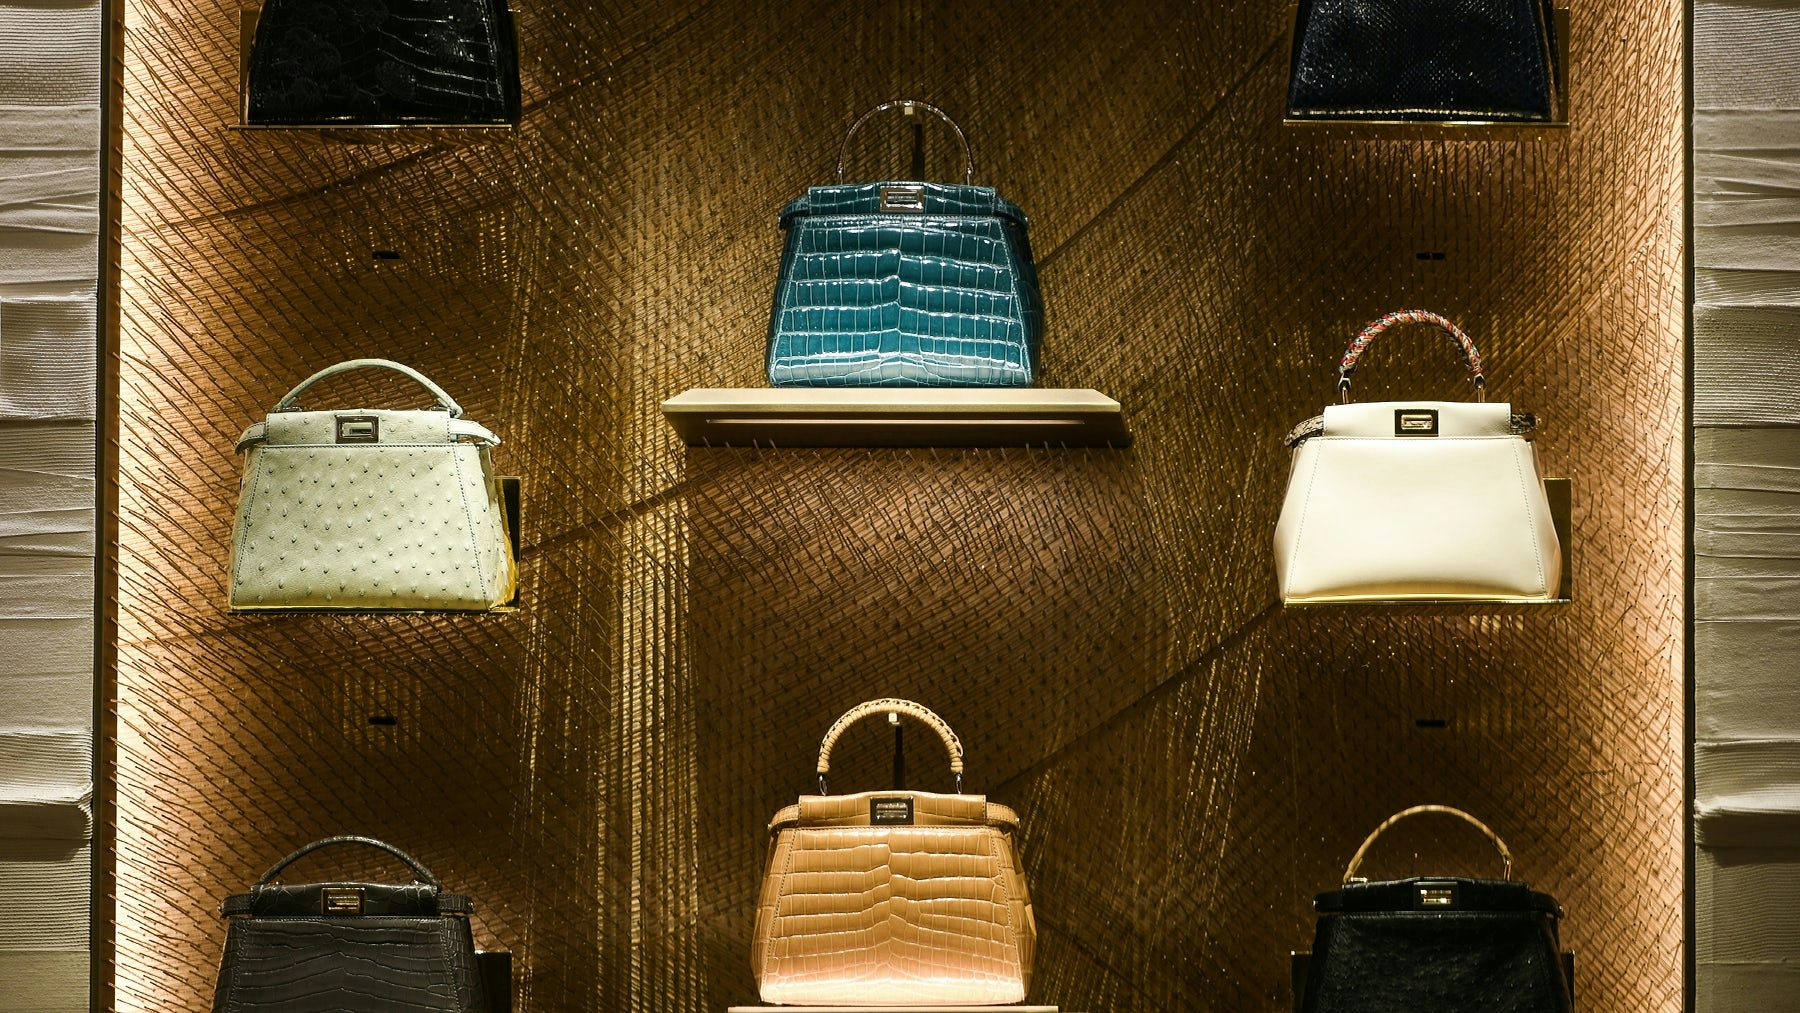 Fendi leather purses on display at a store in Paris. Shutterstock.